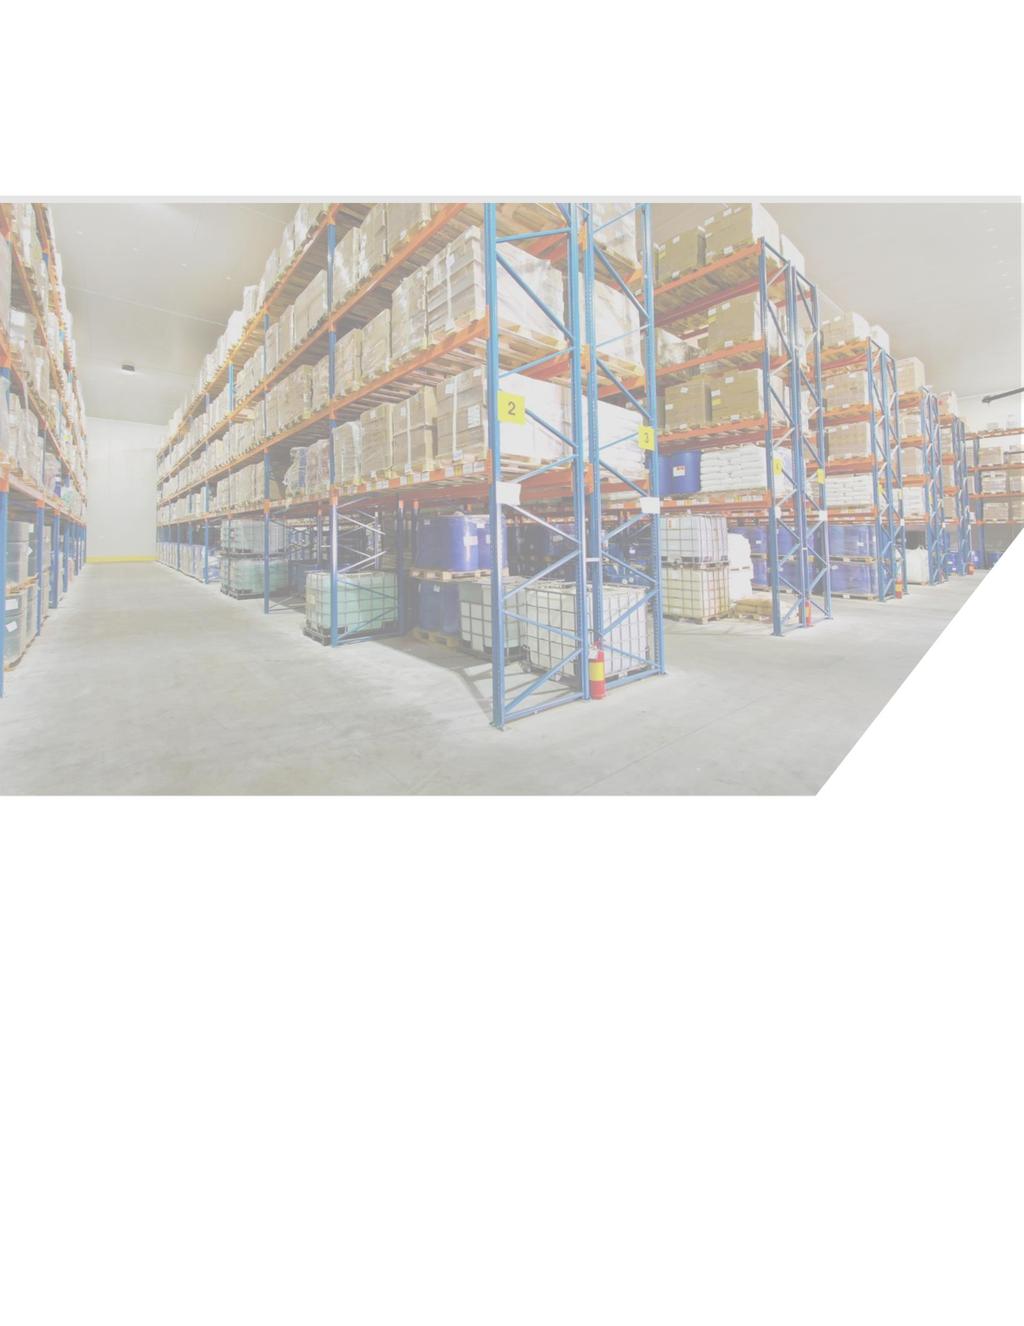 F. Curtis Barry & Company IS A WAREHOUSE MANAGEMENT SYSTEM RIGHT FOR YOUR